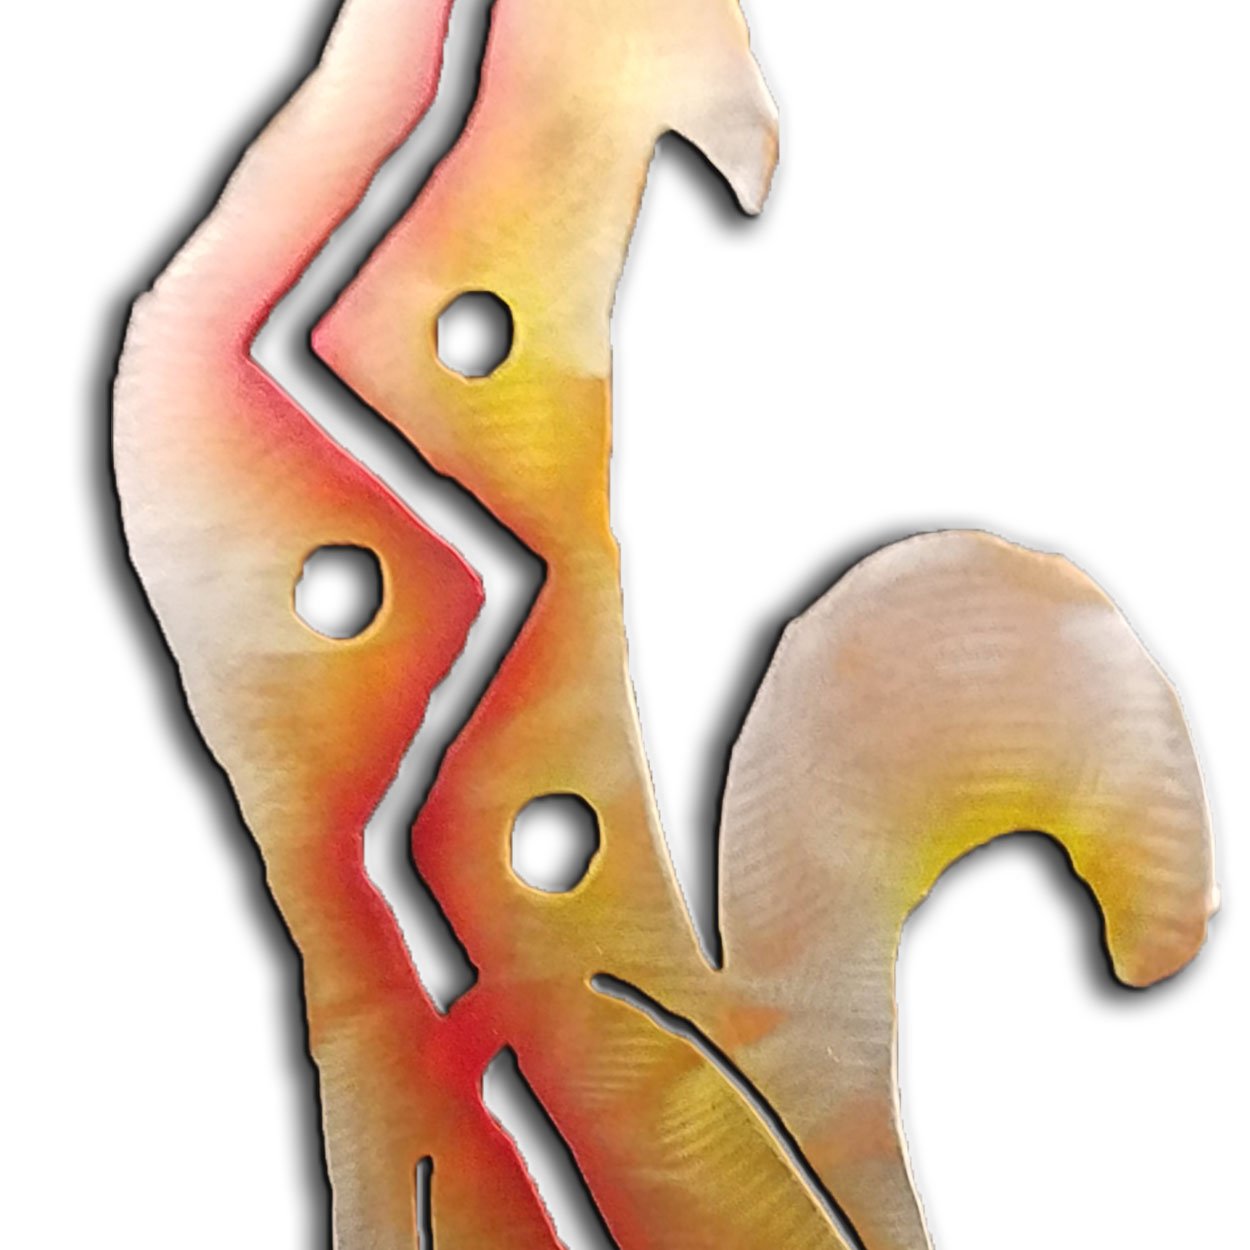 165141 - 12-inch small Howling Coyote Facing Left 3D Metal Wall Art in a vibrant sunset swirl finish